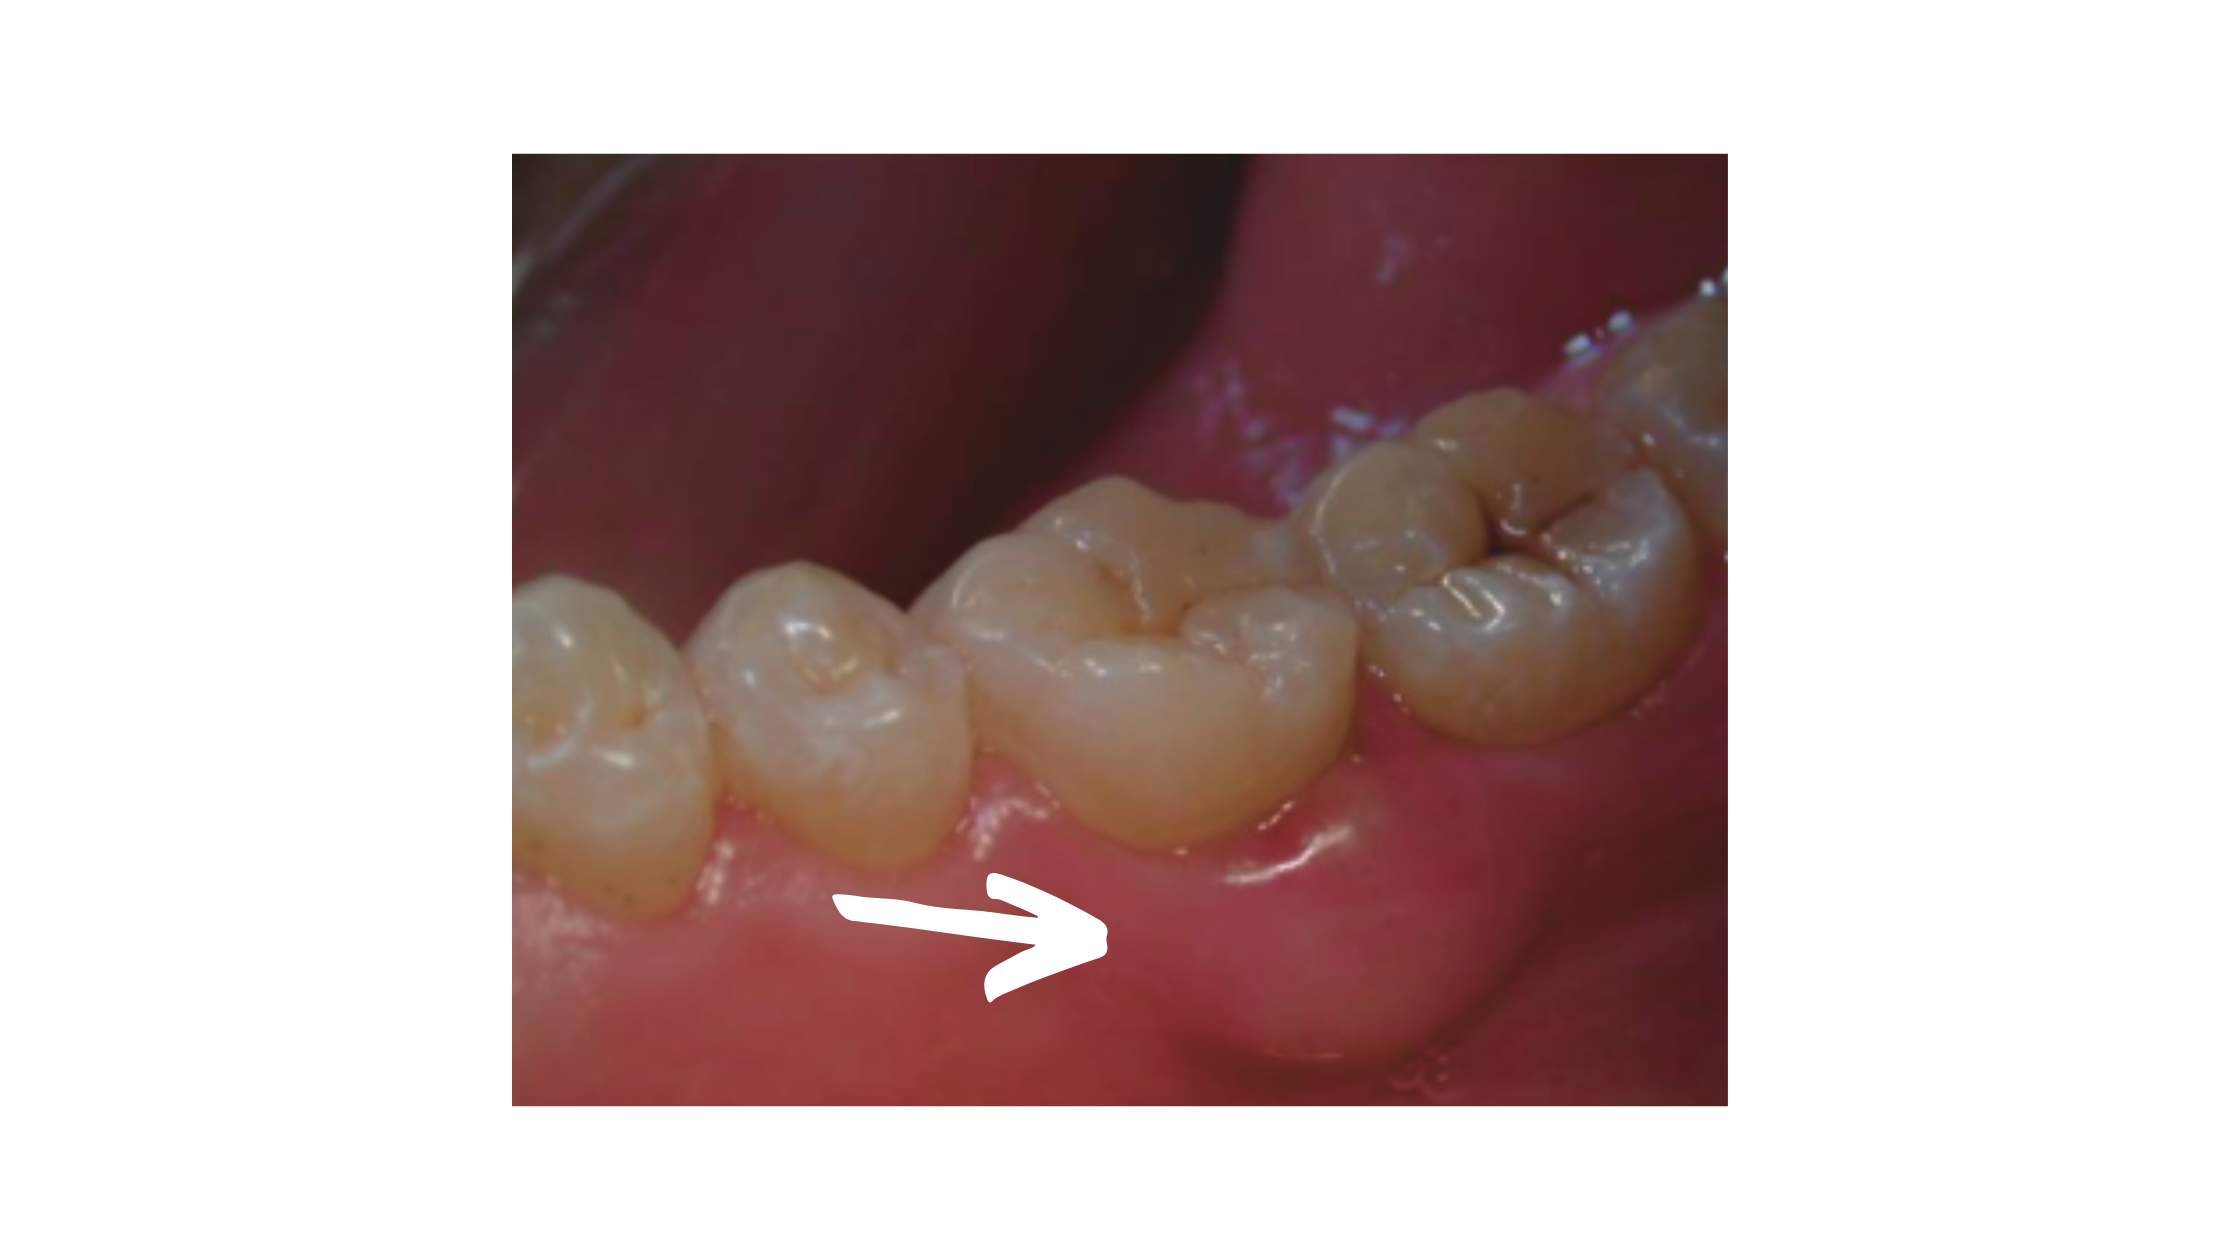 Clinical image of gingival abscess